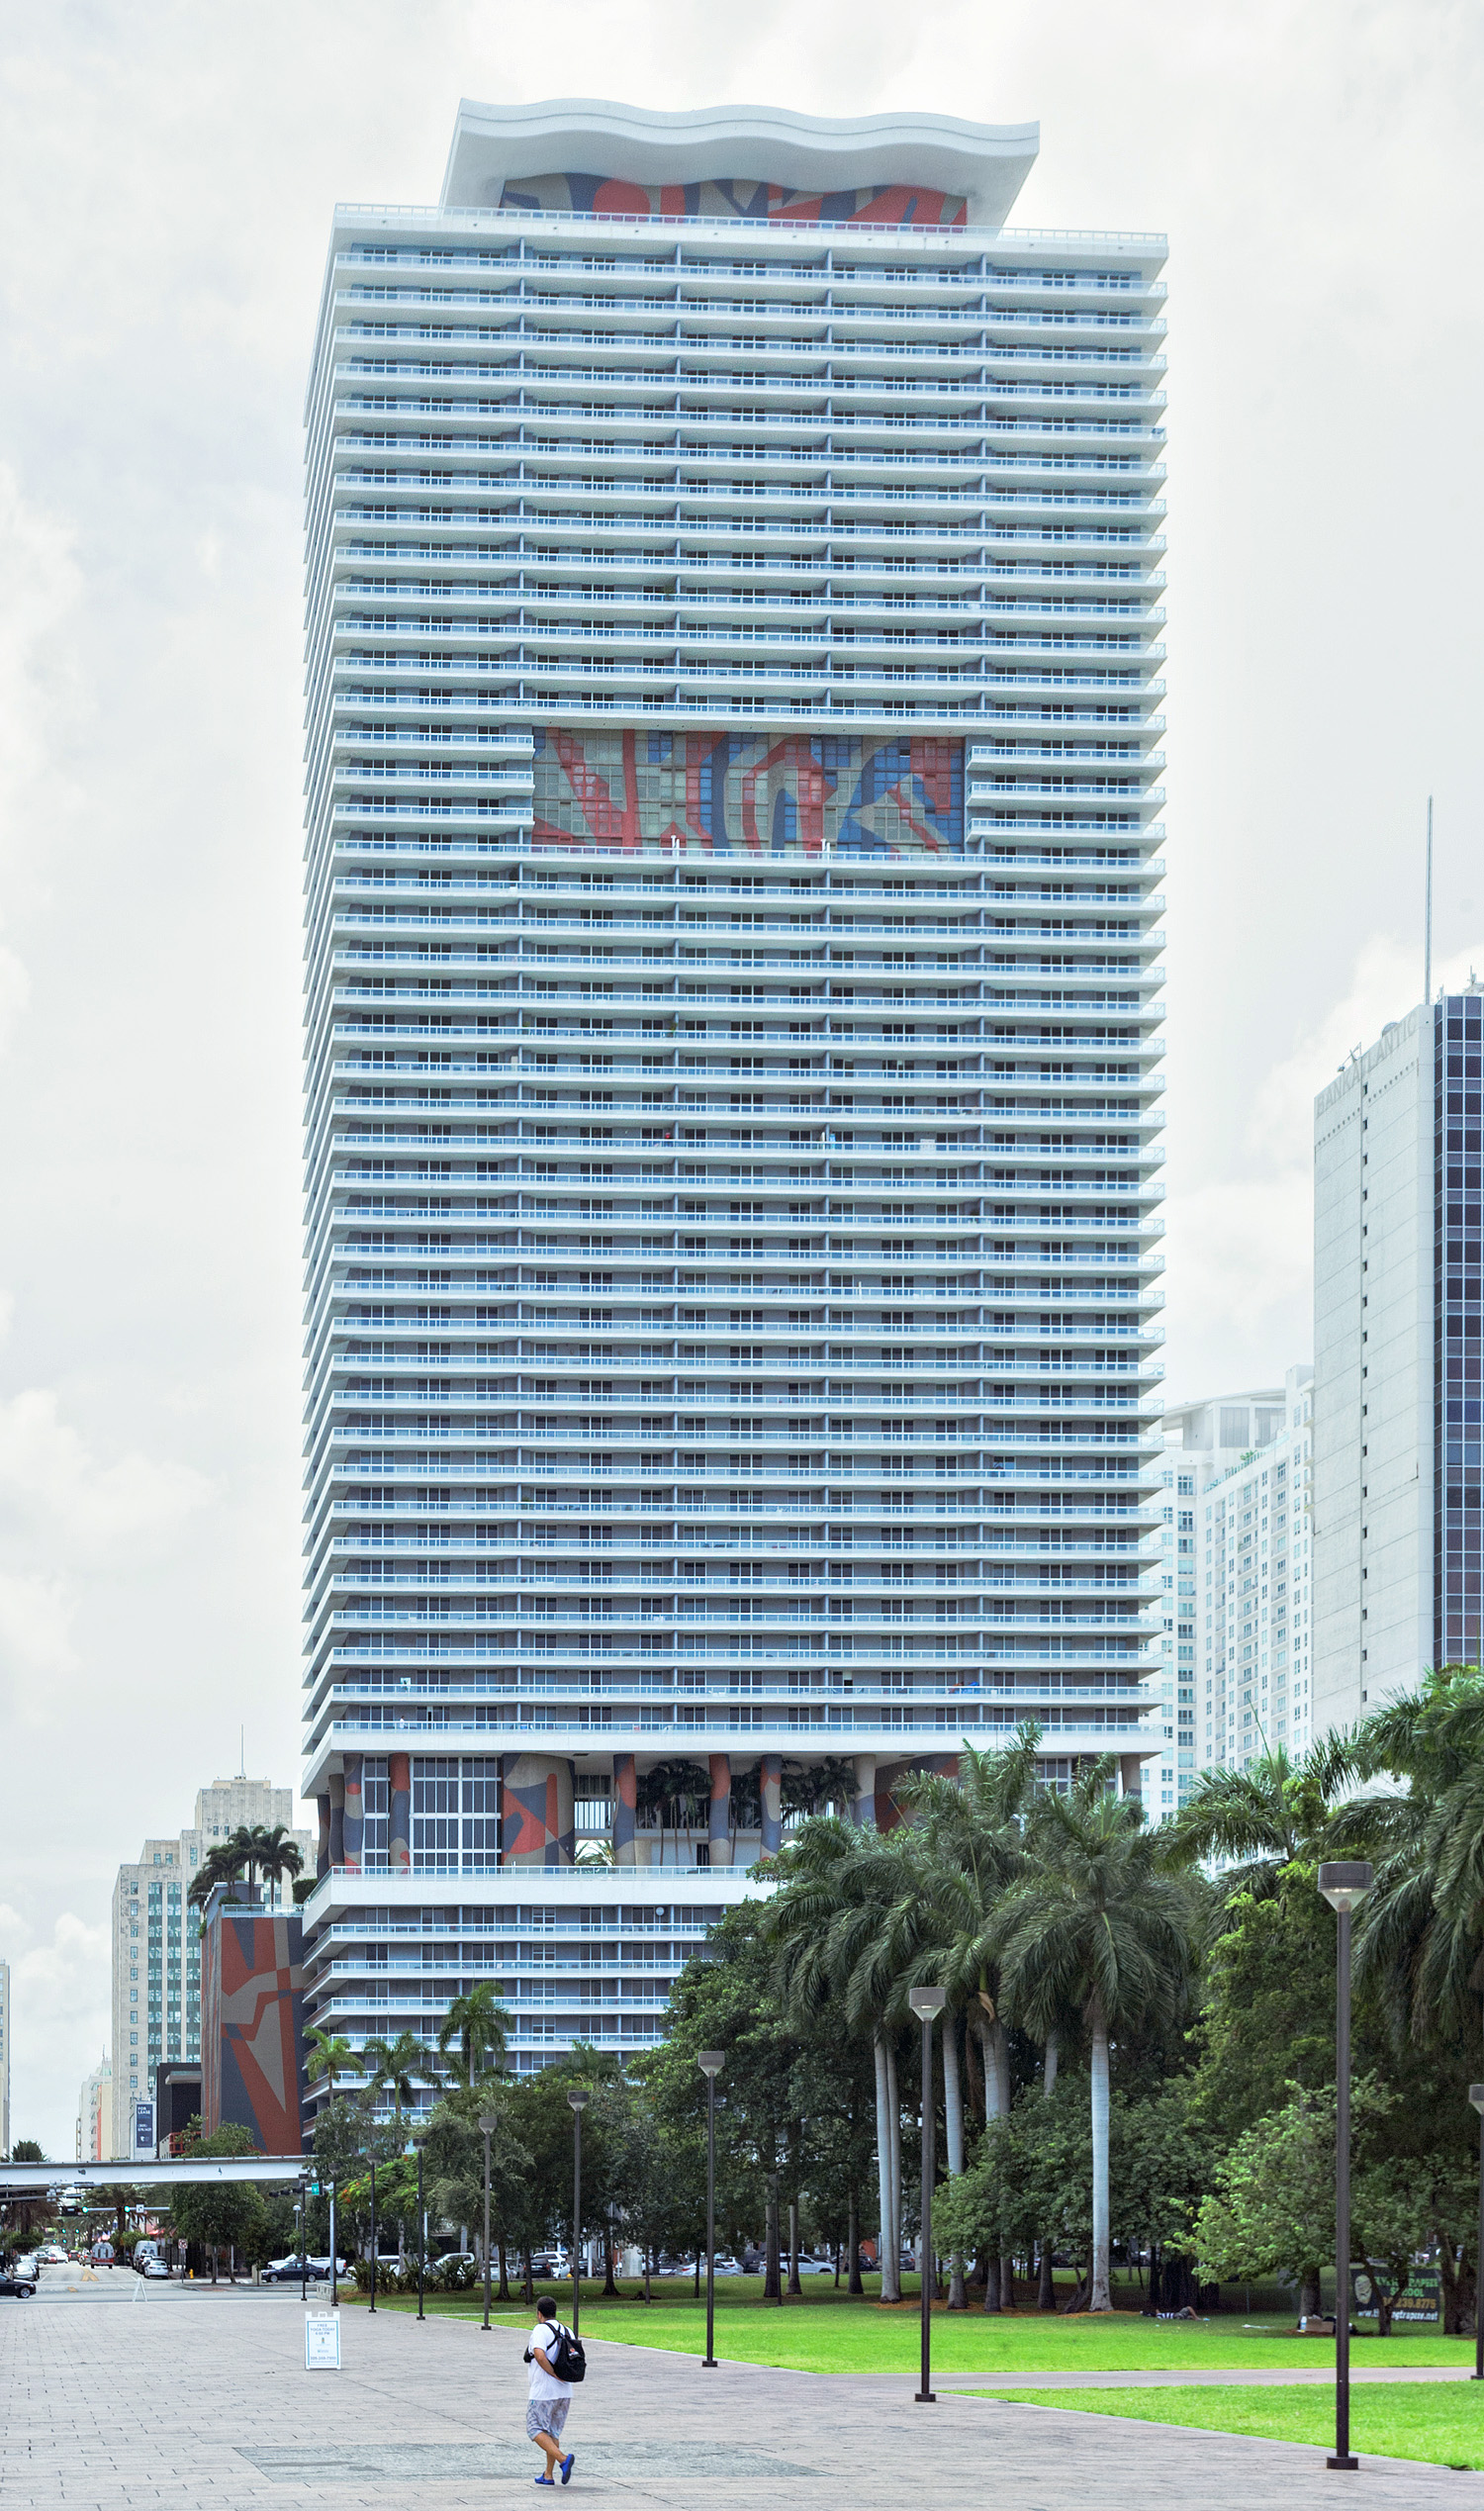 50 Biscayne, Miami - View from Bayfront Park. © Mathias Beinling